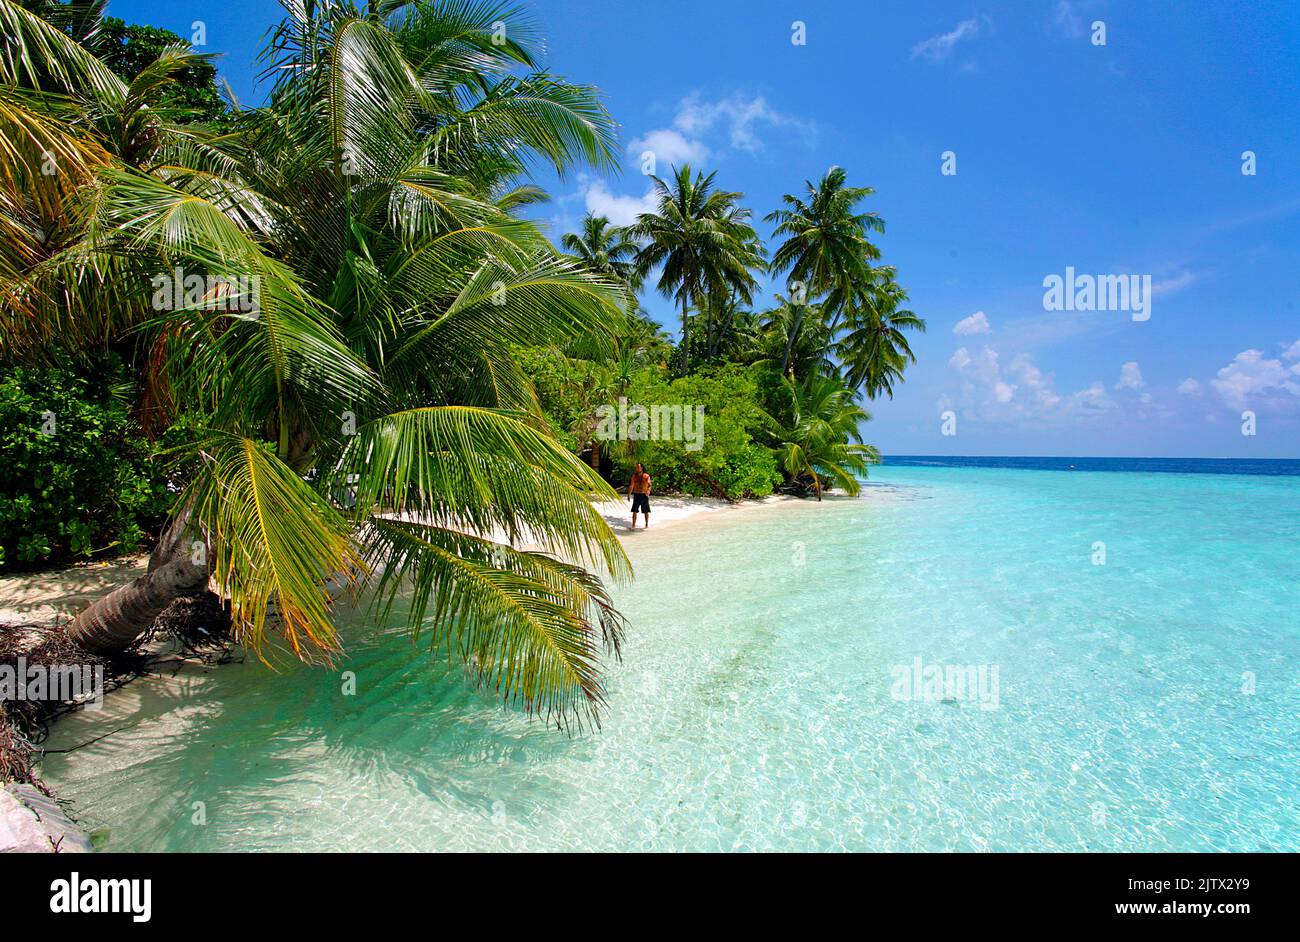 Beach, palm trees and turquoise lagoon of a uninhabited maldivian island, Maldives, Indisan Ocean, Asia Stock Photo